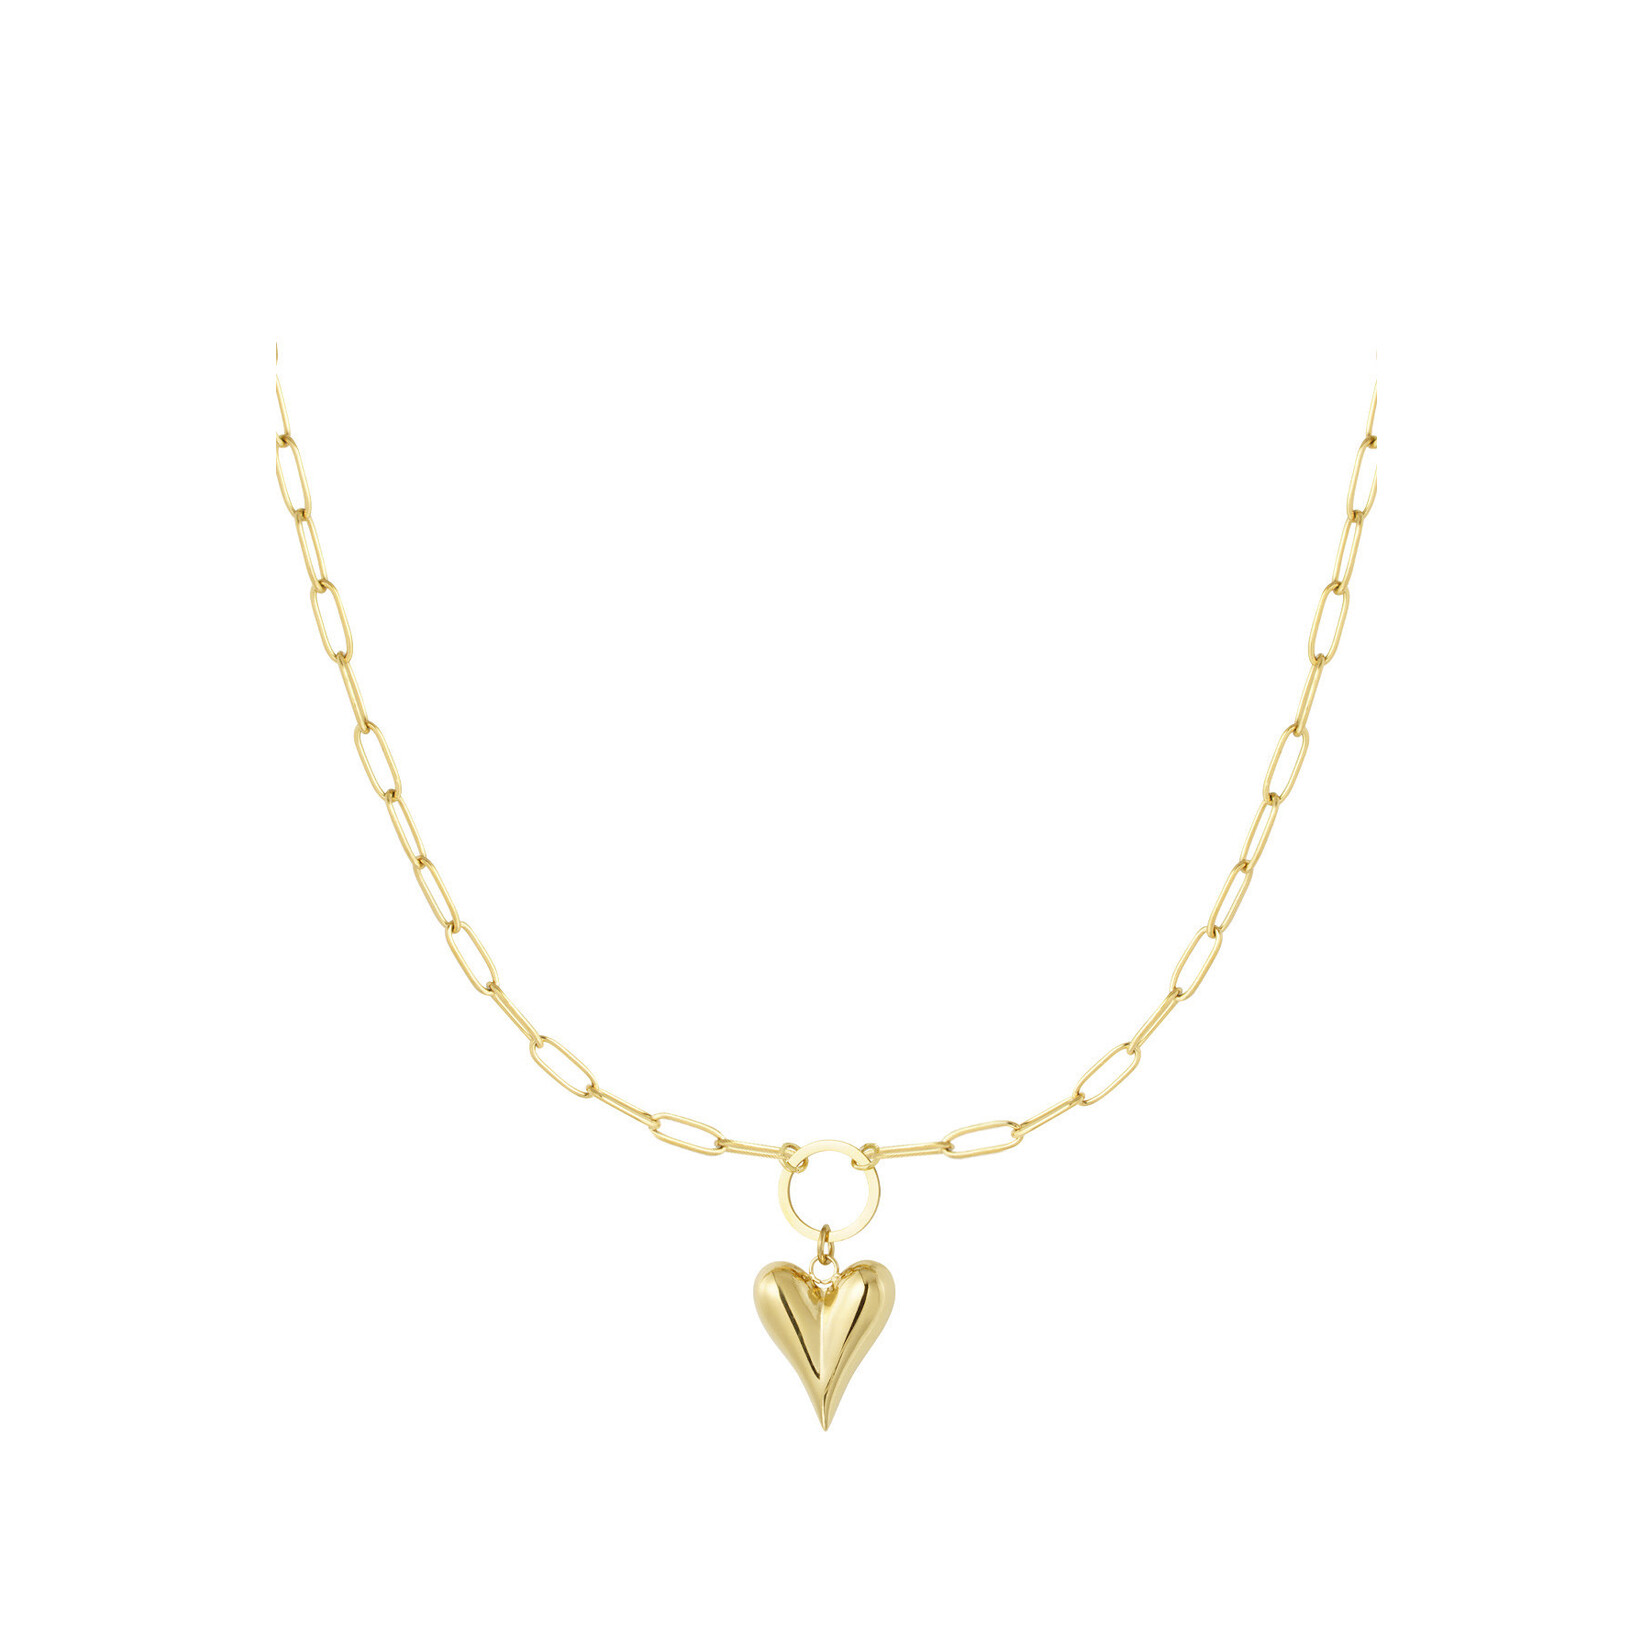 More the Firm Schakelketting iconic heart